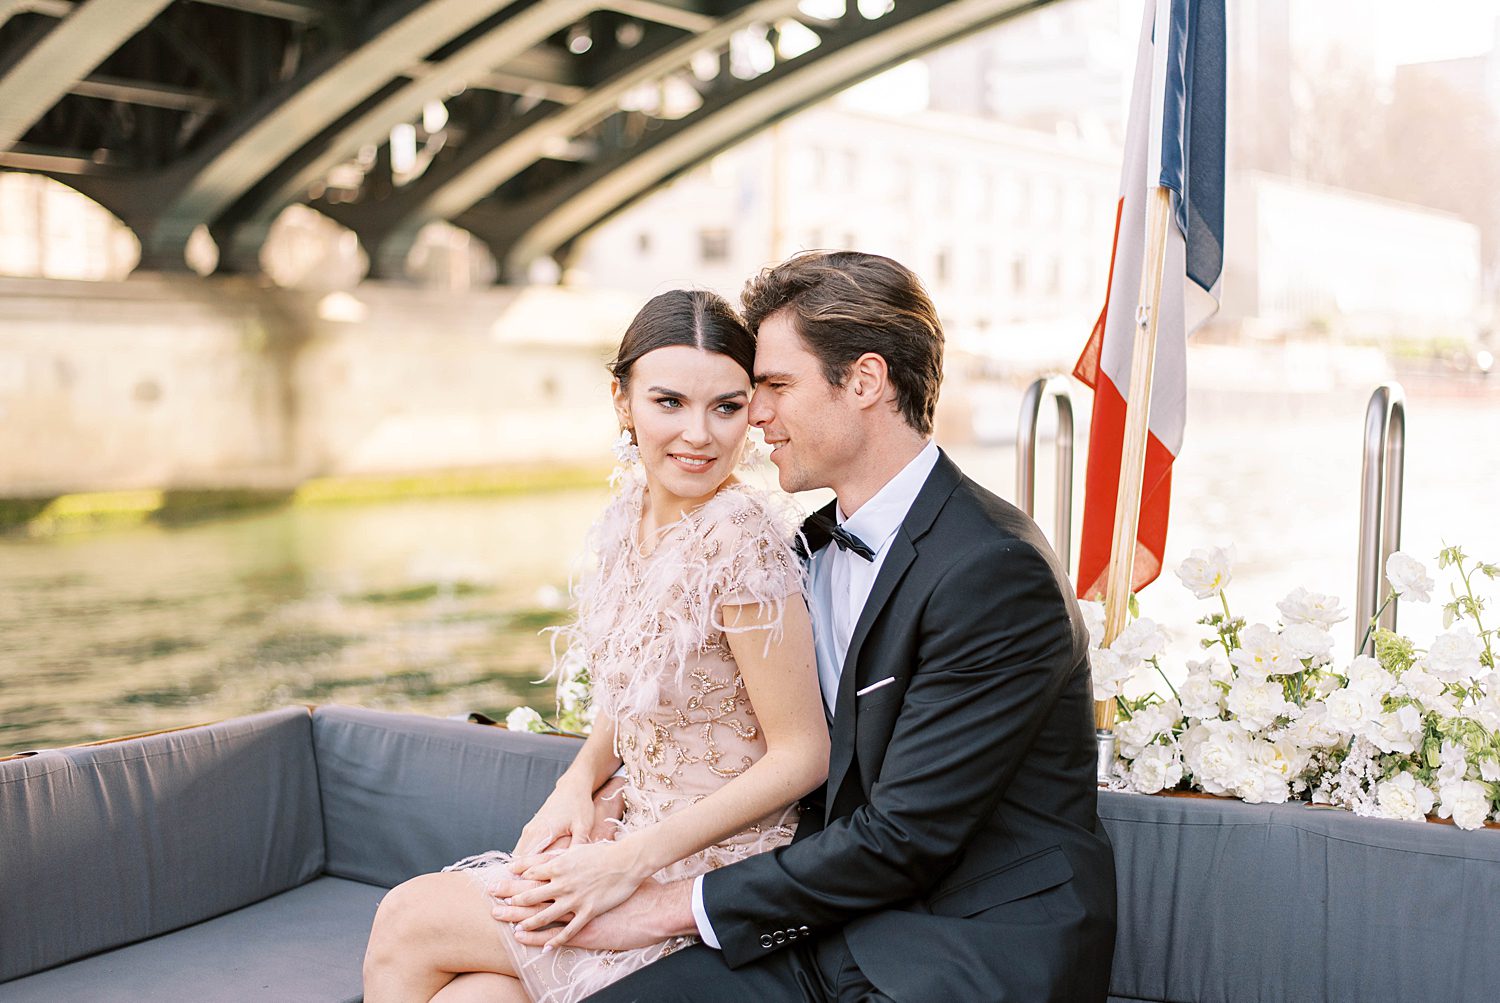 French couple sit on boat on River Seine during French wedding day